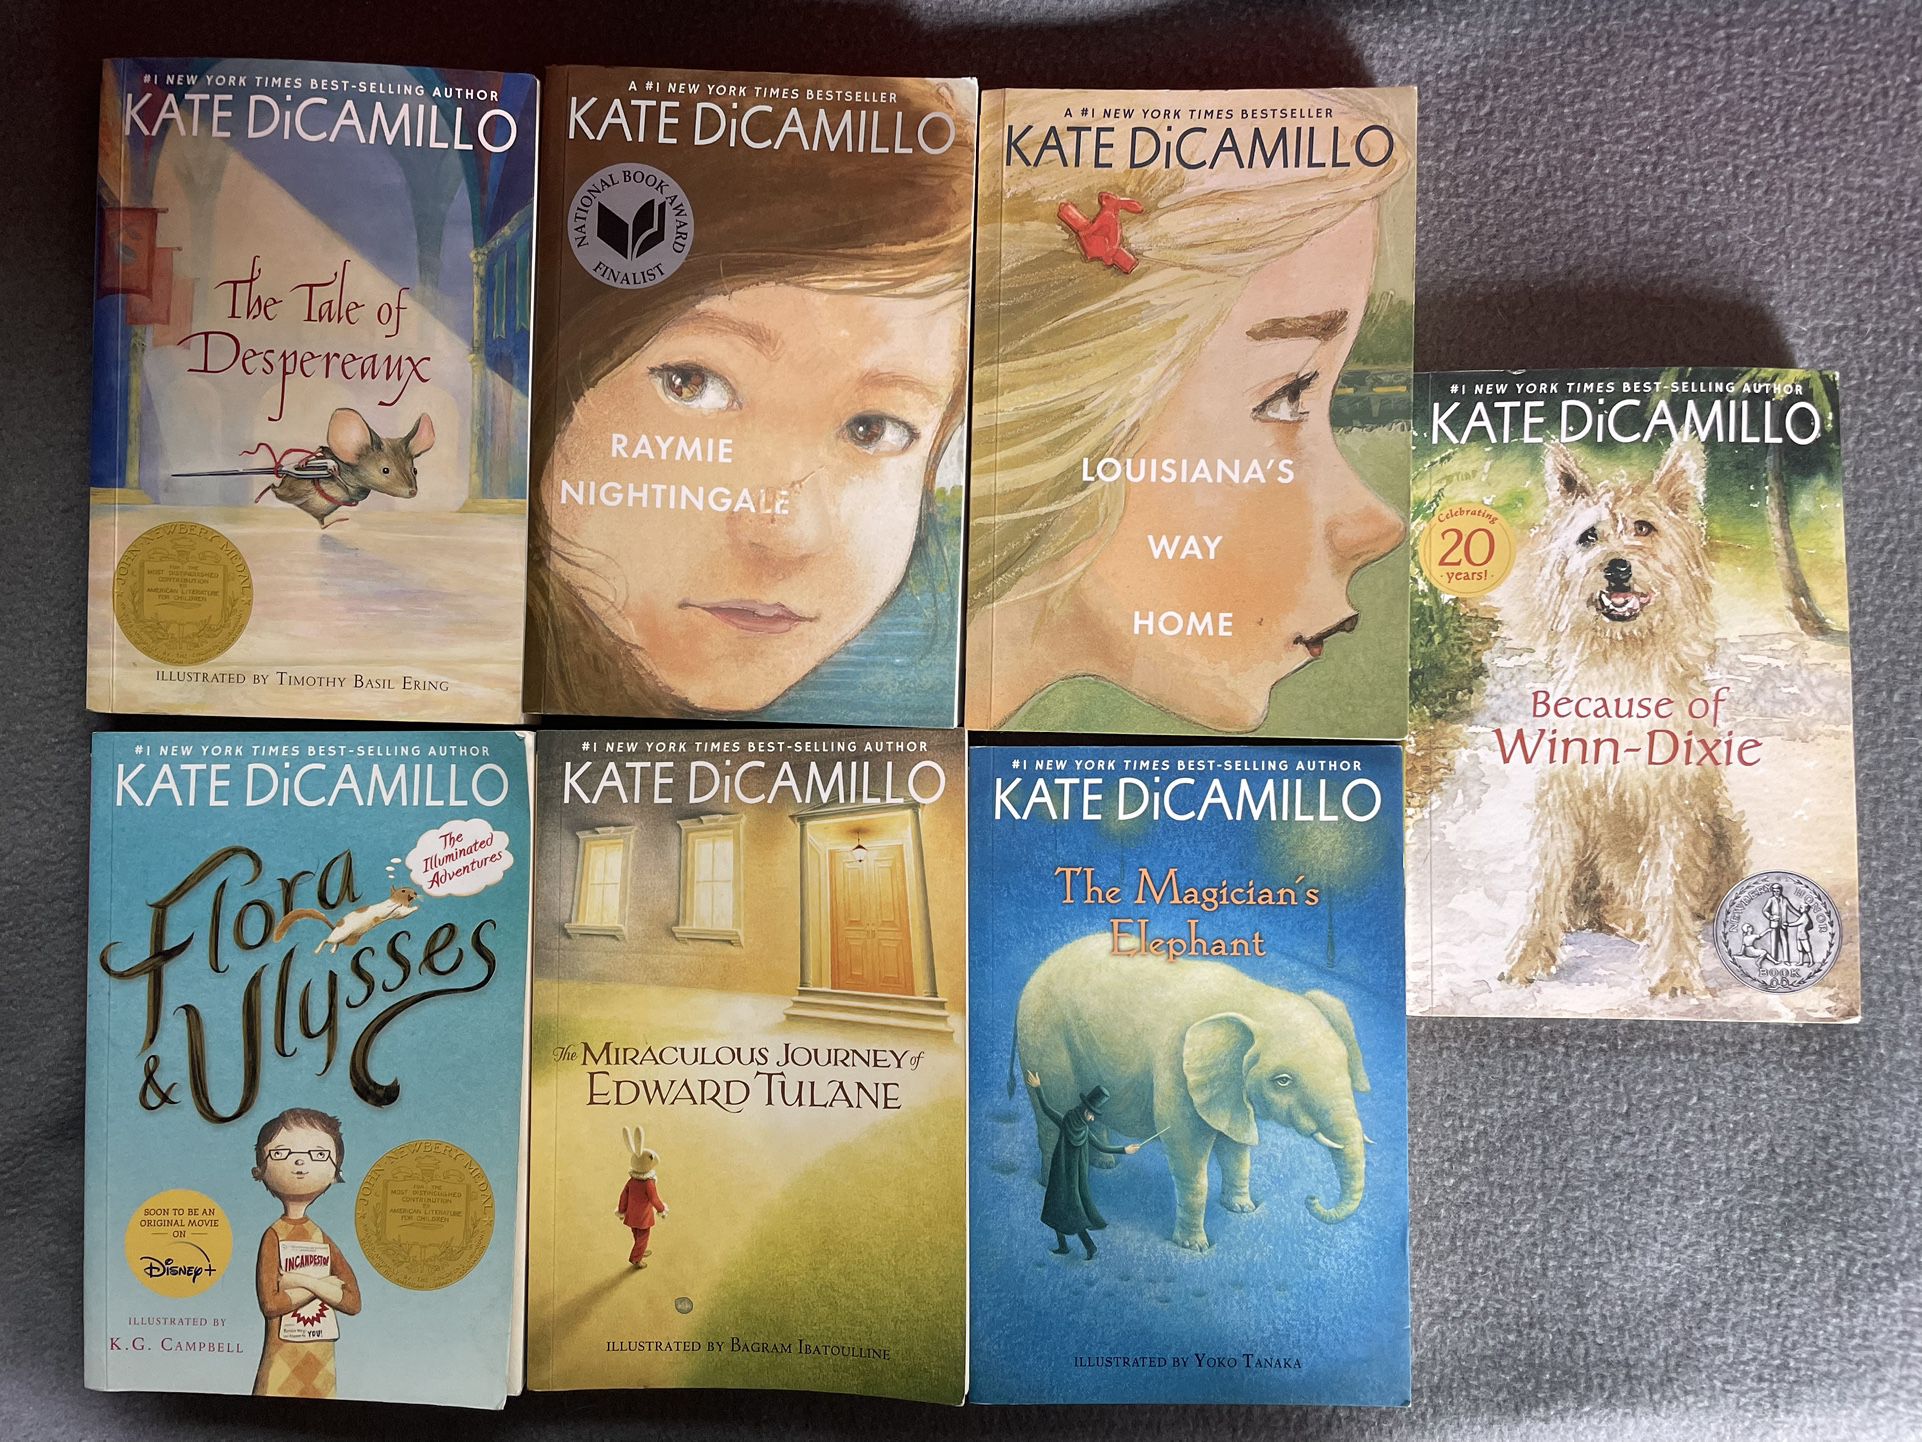 Kate DiCamillo book set, The tale of despereaux, Raymie Nightingale, Louisiana’s Way home, The Magicians Elephant, Because of Winn-Dixie, The Miraculo